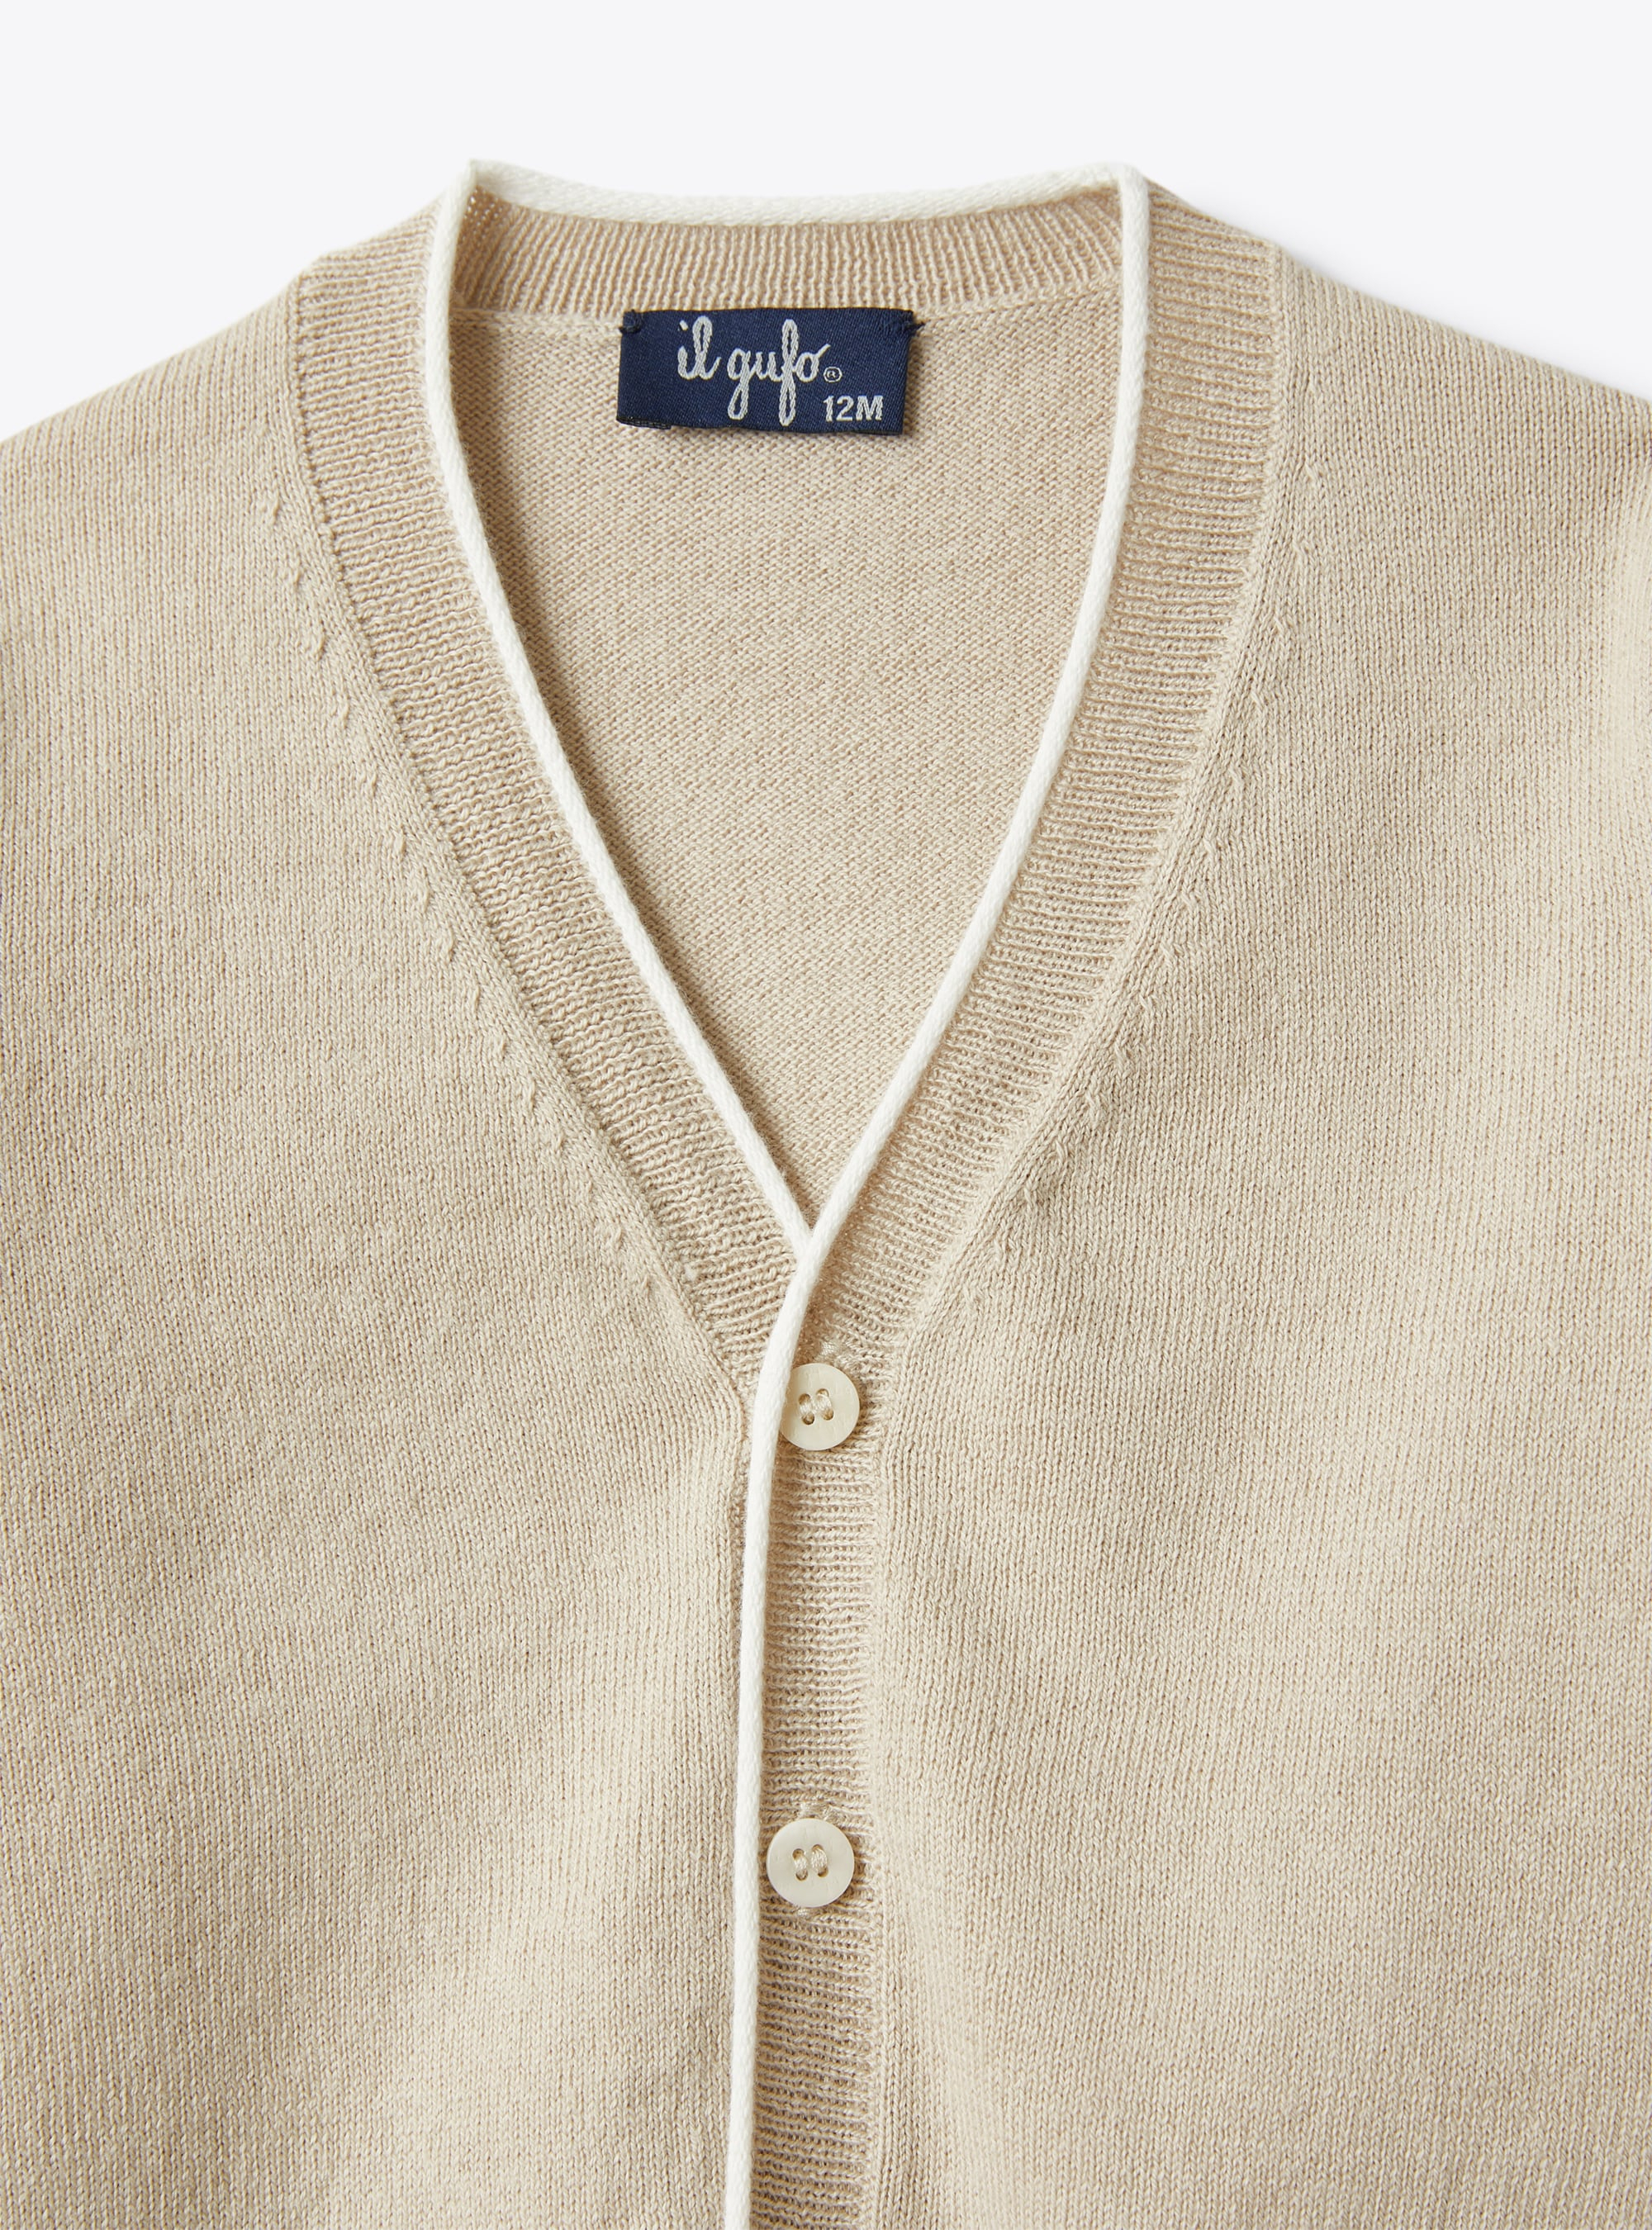 Cardigan in organic cotton with contrasting piping - White | Il Gufo